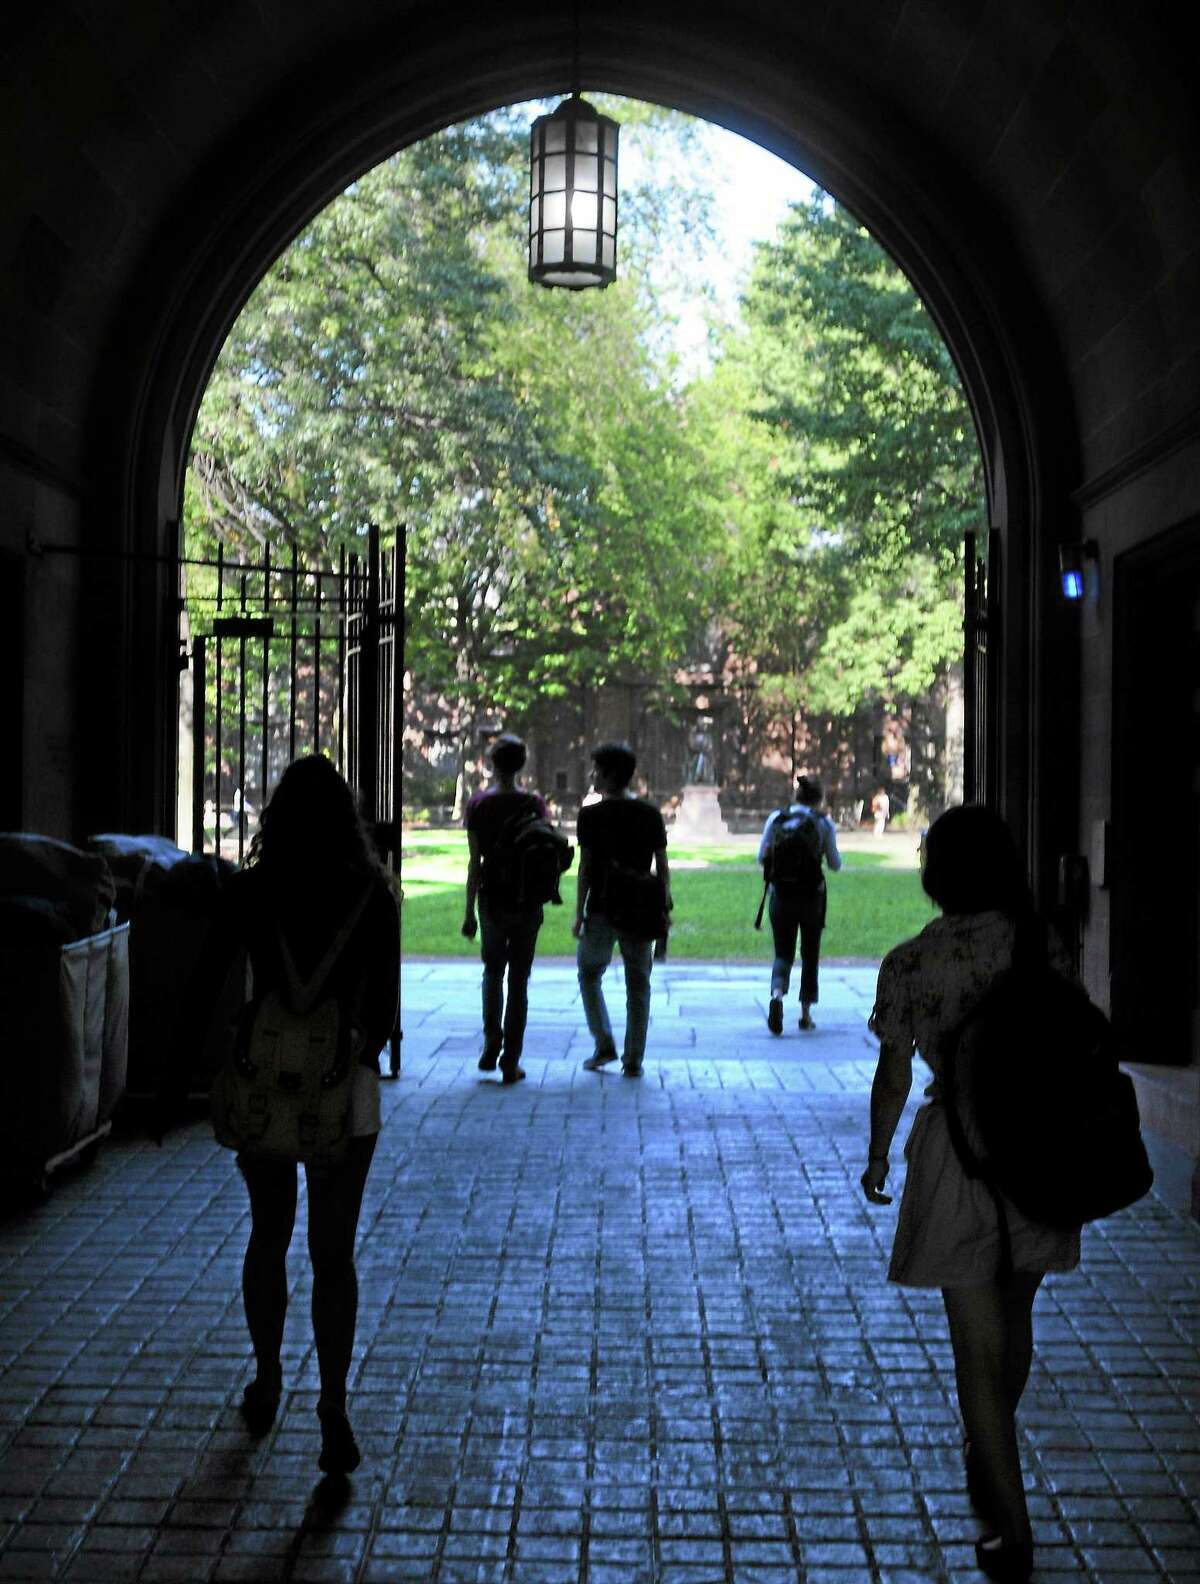 Despite the efforts of Florida Gov. Rick Scott, Yale’s students will continue to call the Old Campus in New Haven home.